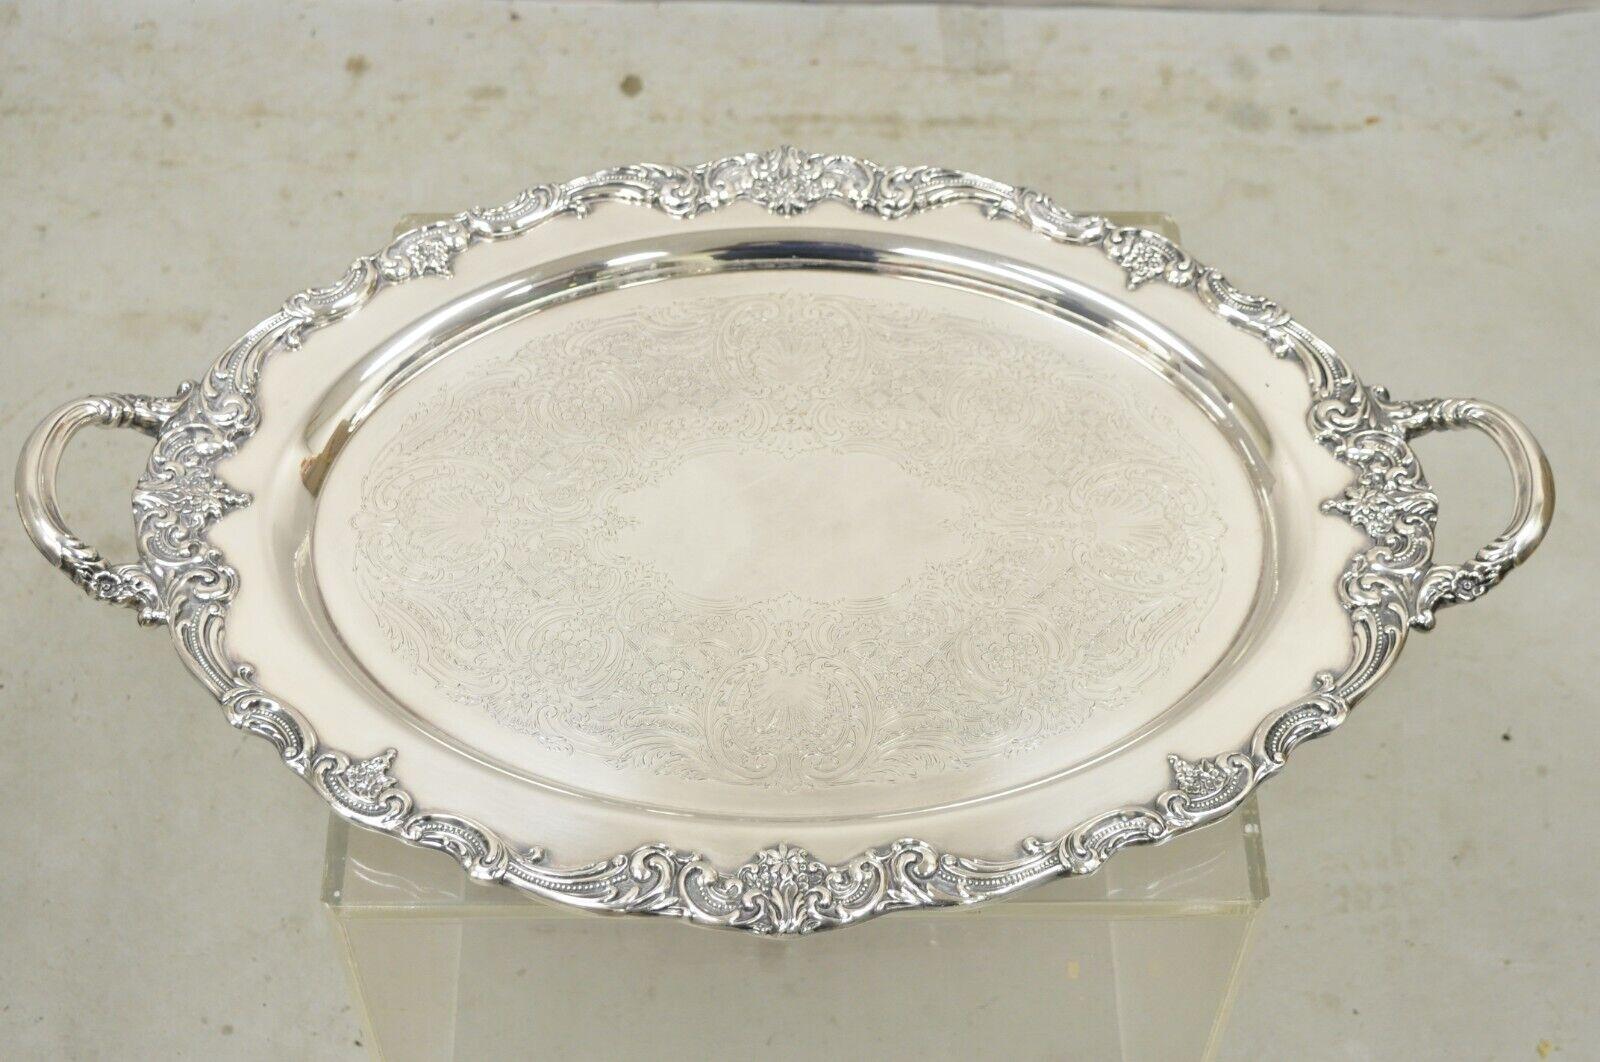 Vintage Reed & Barton 1955 25 Silver Plated Oval Twin Handle Large Serving Platter Tray. Item features heavy Construction, Ornate Floral Design Handles, Etched Center, Original Hallmark, Quality Craftsmanship, Large Impressive Size.
Circa Mid 20th